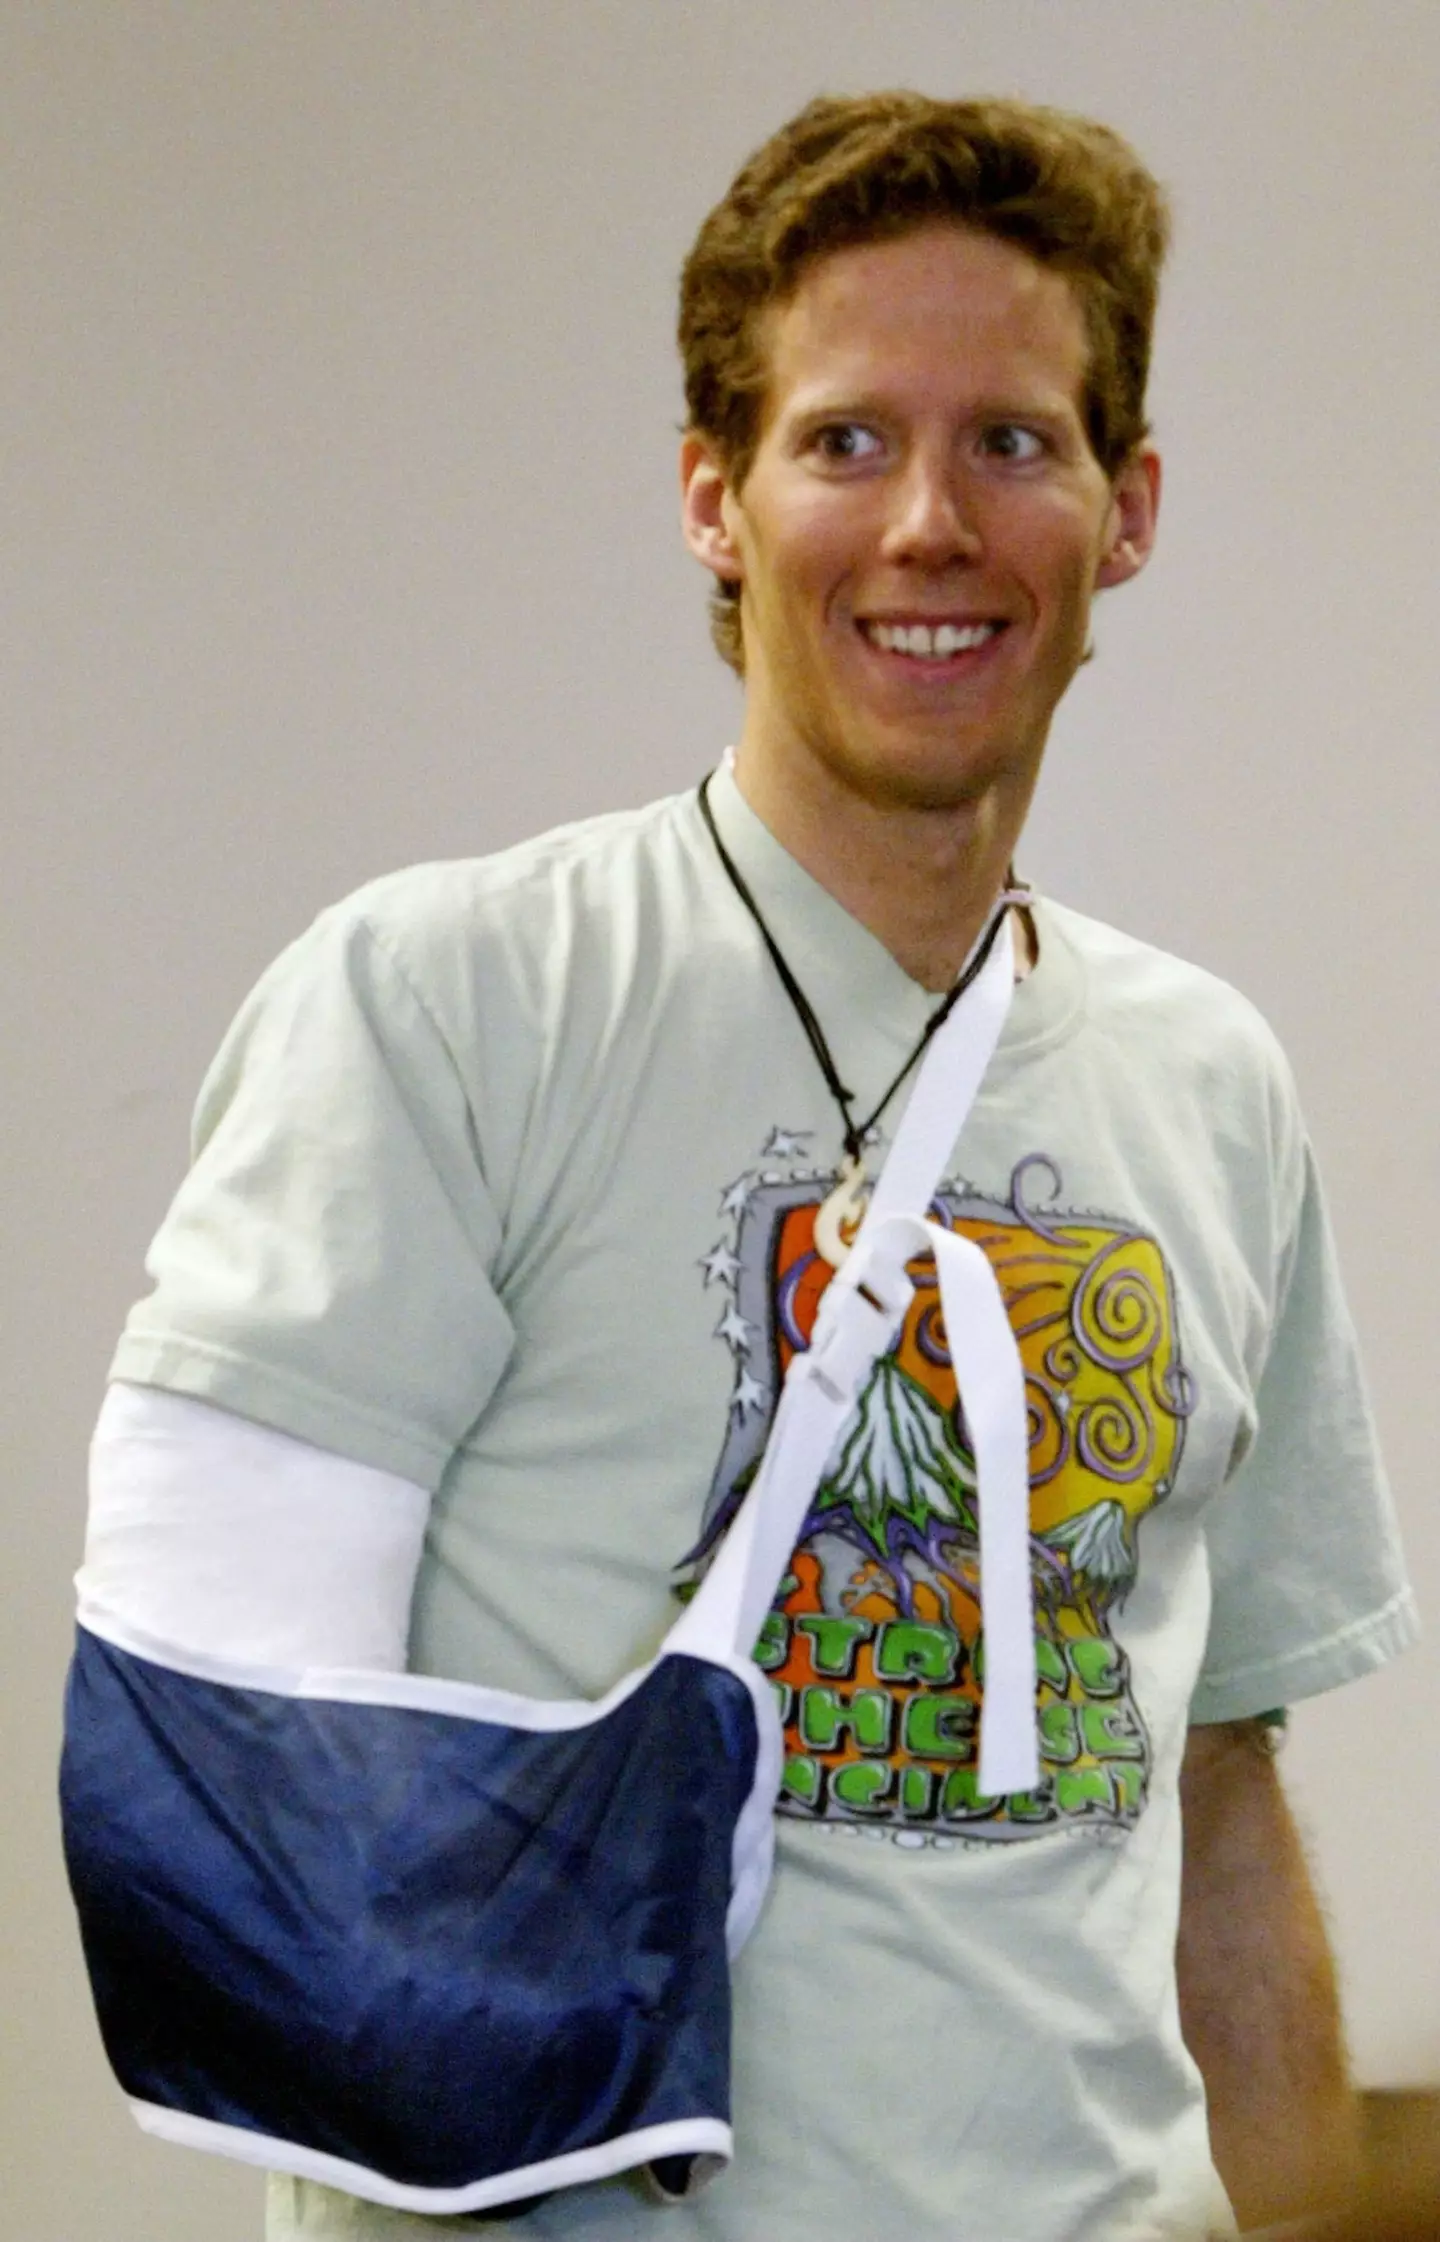 Aron Ralston cut off his lower arm below the elbow to break free of the boulder. (Gretel Daugherty/Getty Images)